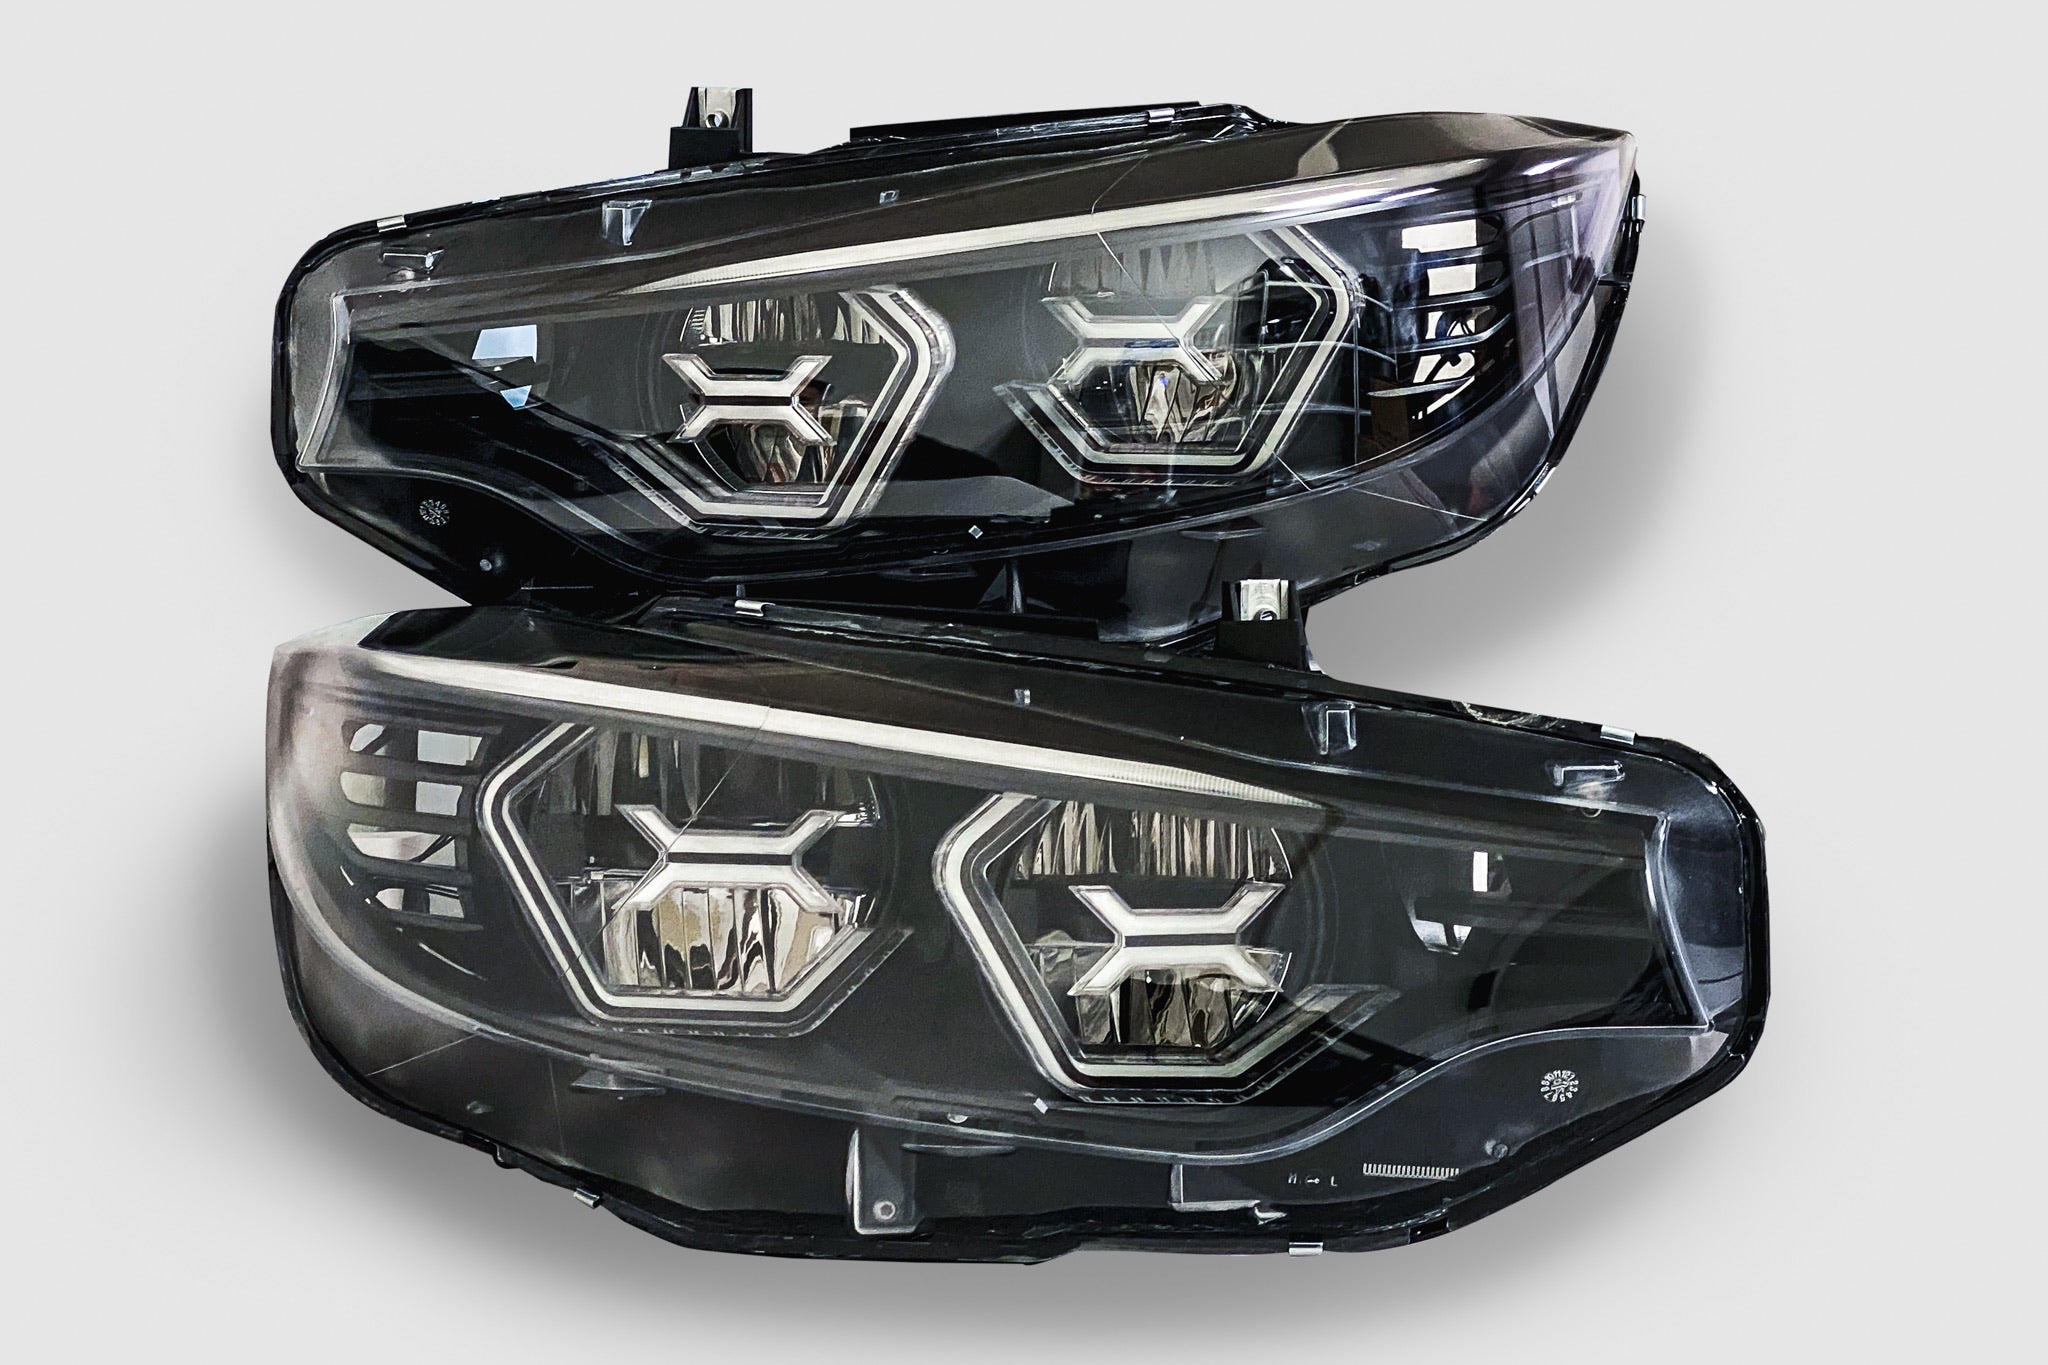 PRE-BUILT F8X F80 M3 F82 F83 M4 F32 F36 Vision Concept Headlights With Red Concept X (2014 - 2017 LED Headlights Only)